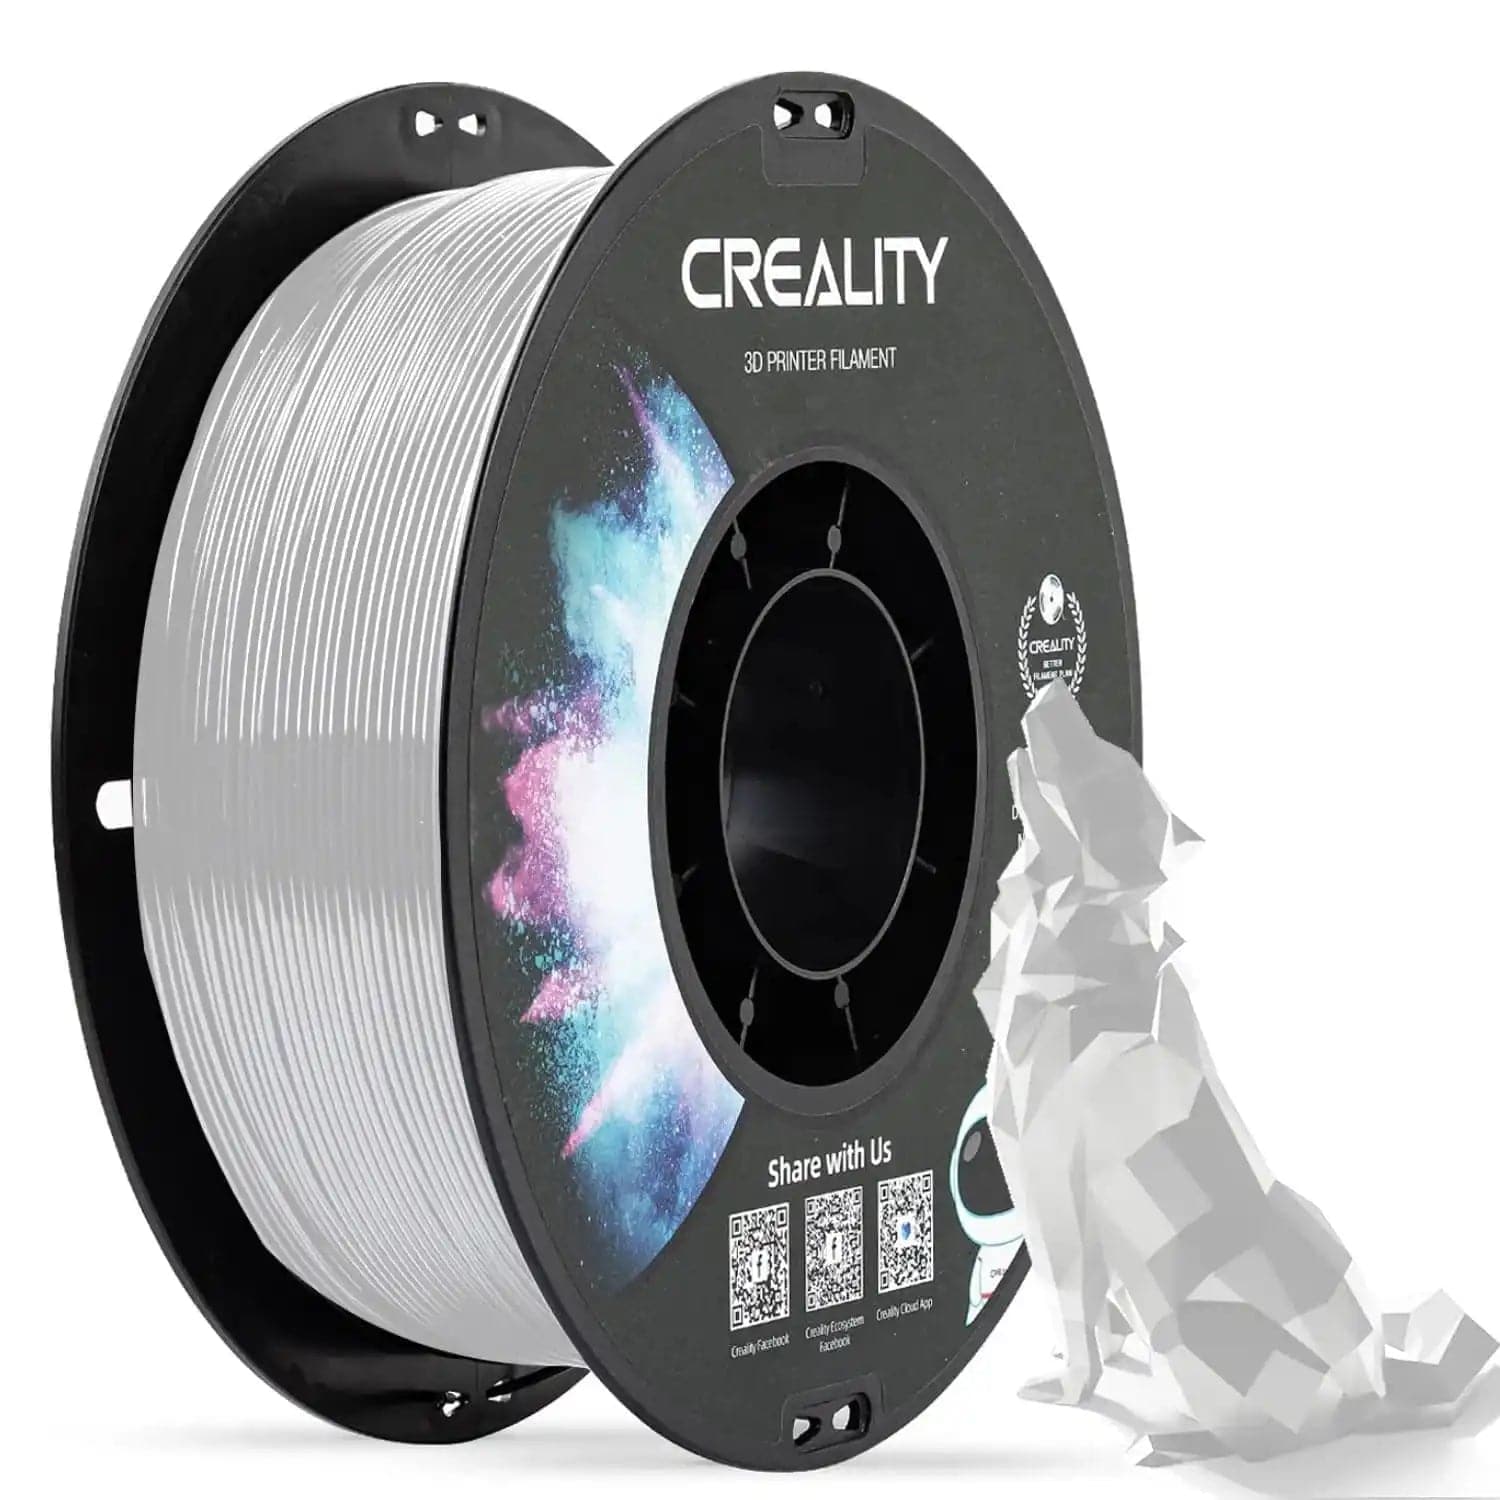 Official Creality PETG 3D Printer Filament 1.75mm 1KG (2.2lbs)Features:

【Ship From Amazon FBA Warehouse】Same shipping service with Amazon. Enjoy reliable performance and fast shipping with the Amazon FBA Warehouse.
【Creality QOfficial Creality PETG 3D Printer Filament 13D Printing Materials